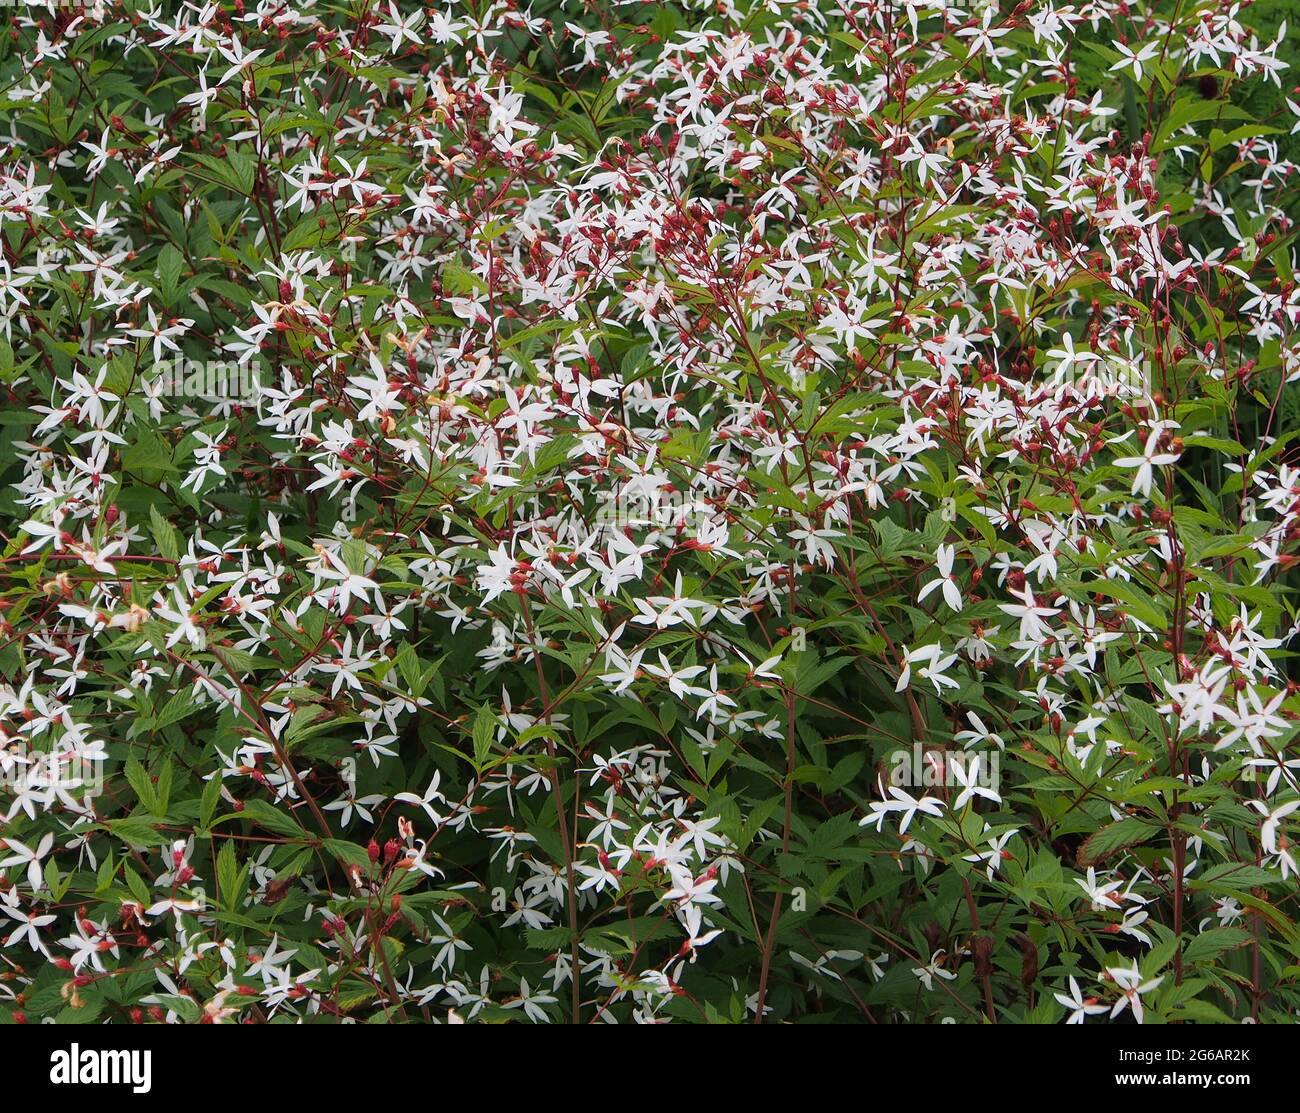 Gillenia Trifoliata - common names Bowman's Root or False Ipecac, which carries tiny star shaped white flowers above reddish branches. Stock Photo